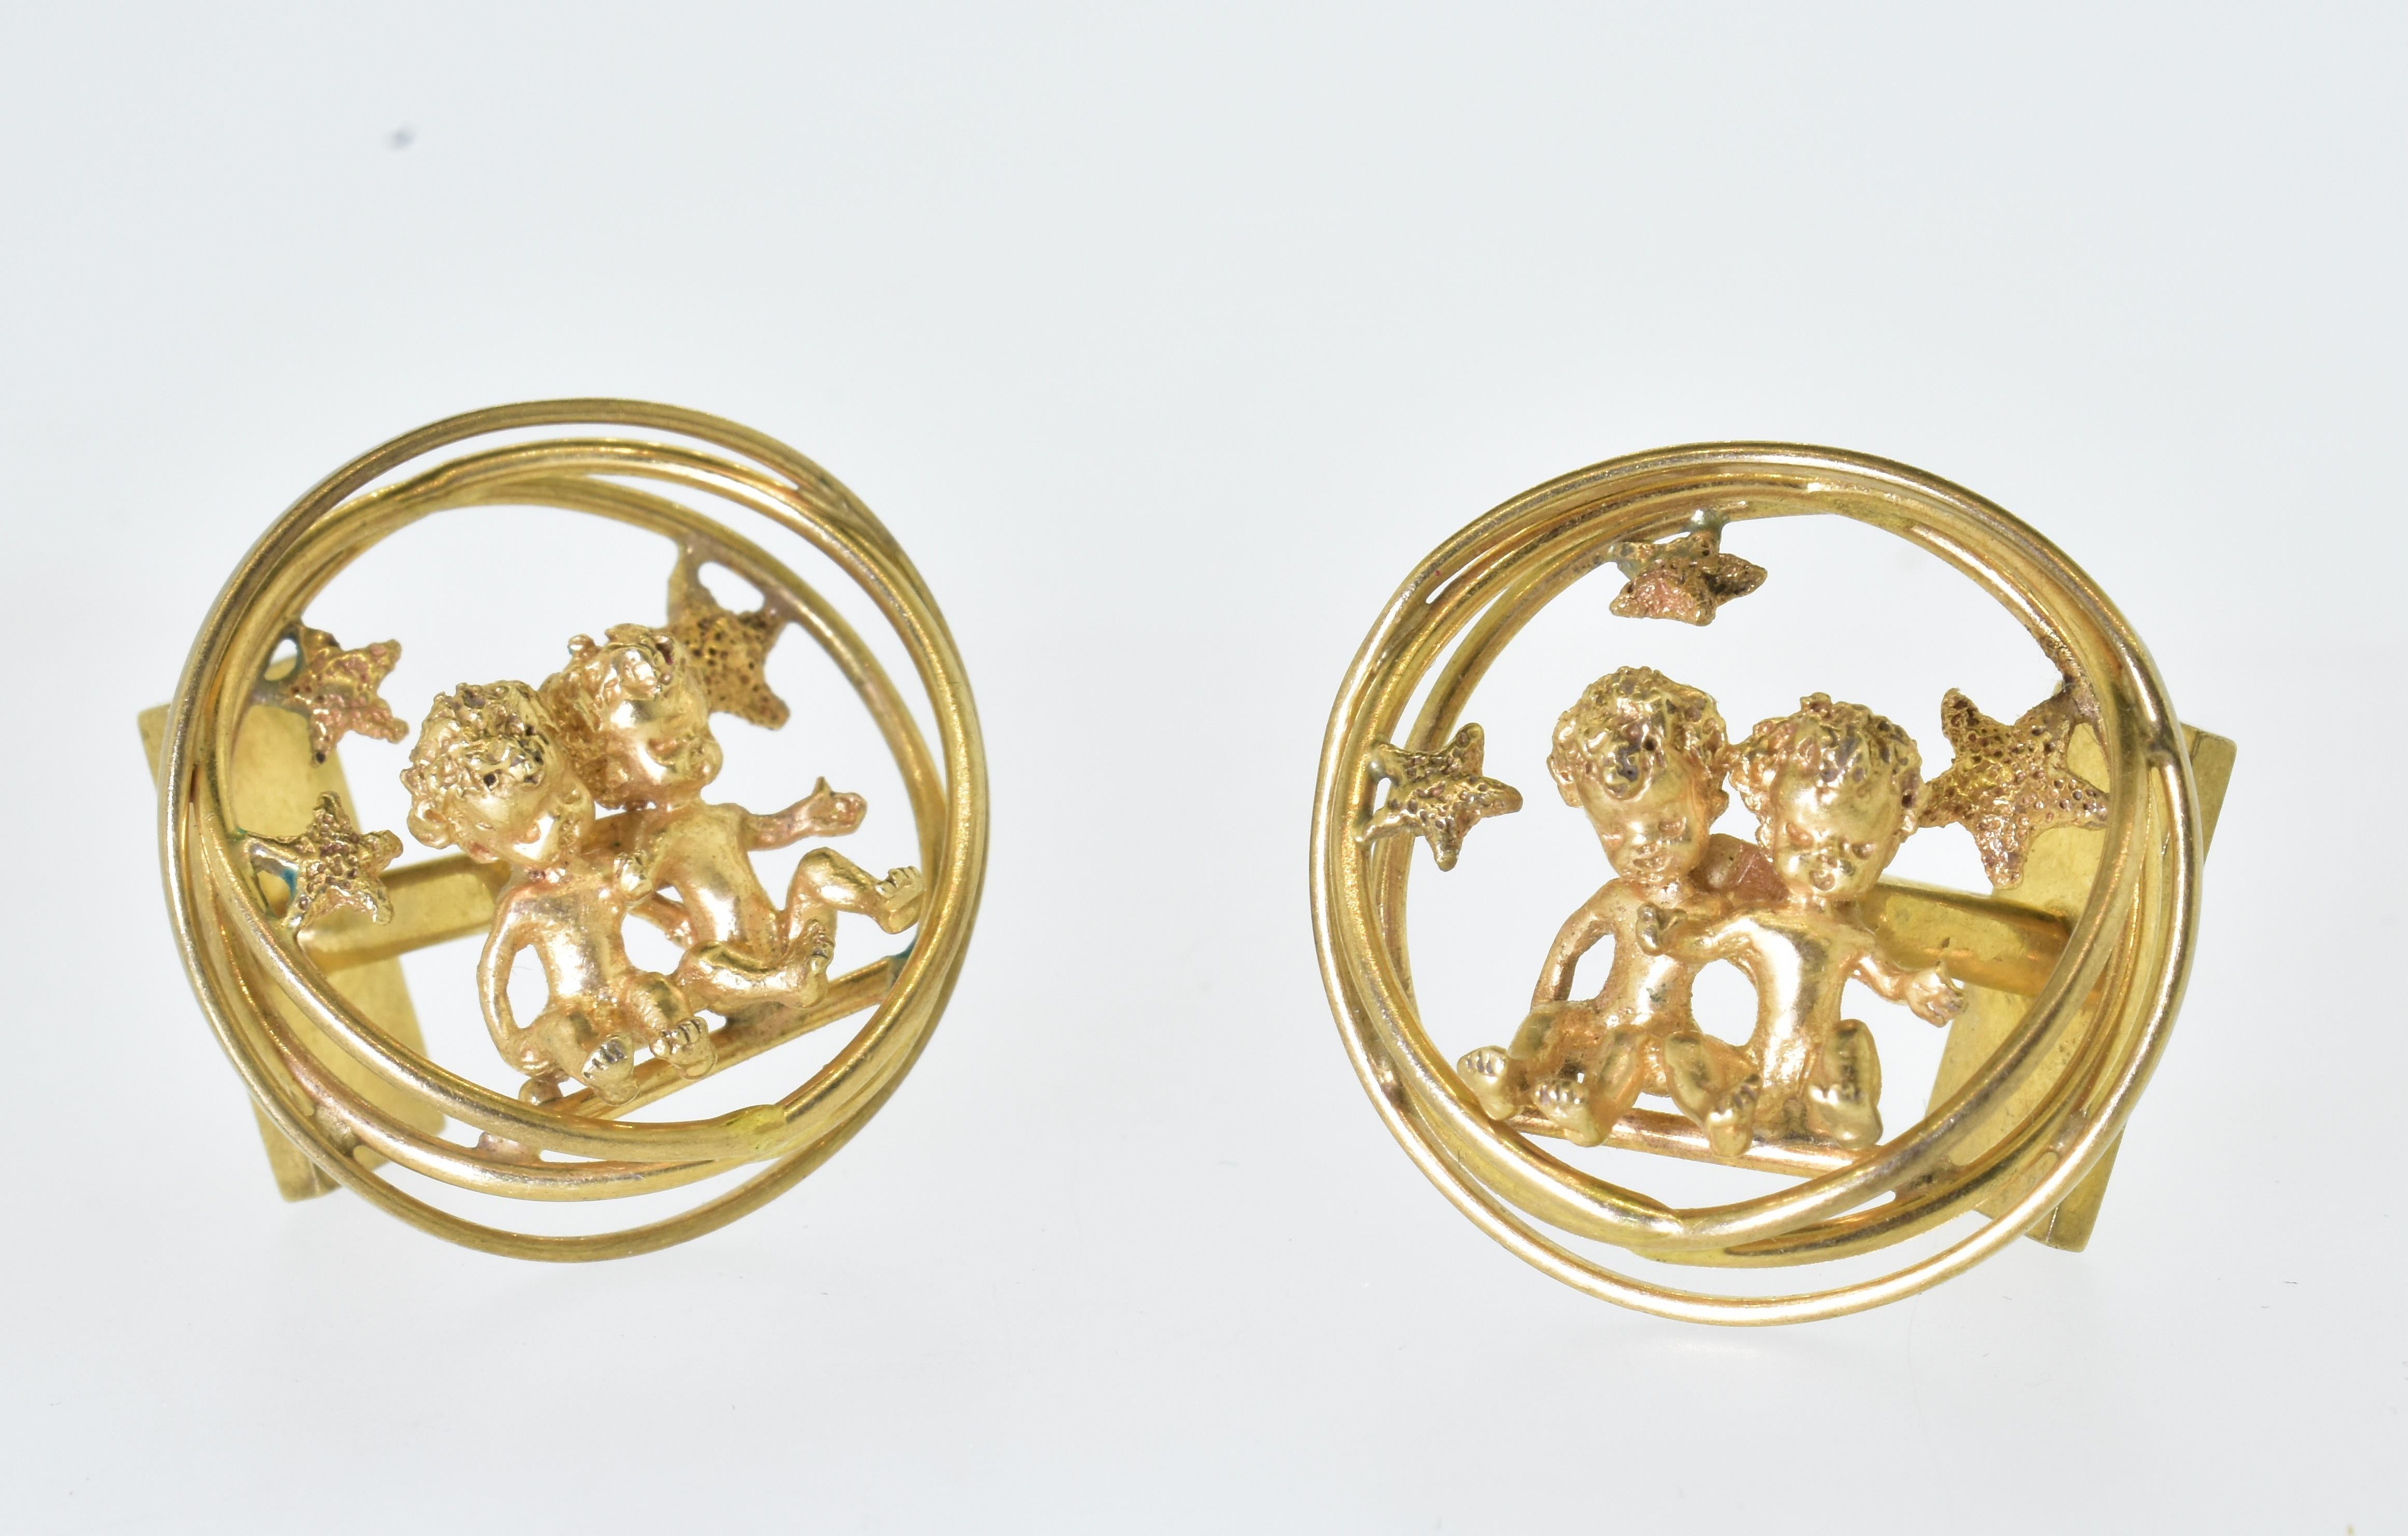 Yellow Gold Amusing Motif Cufflinks by the famous American designer Ruser, 1955 In Excellent Condition For Sale In Aspen, CO